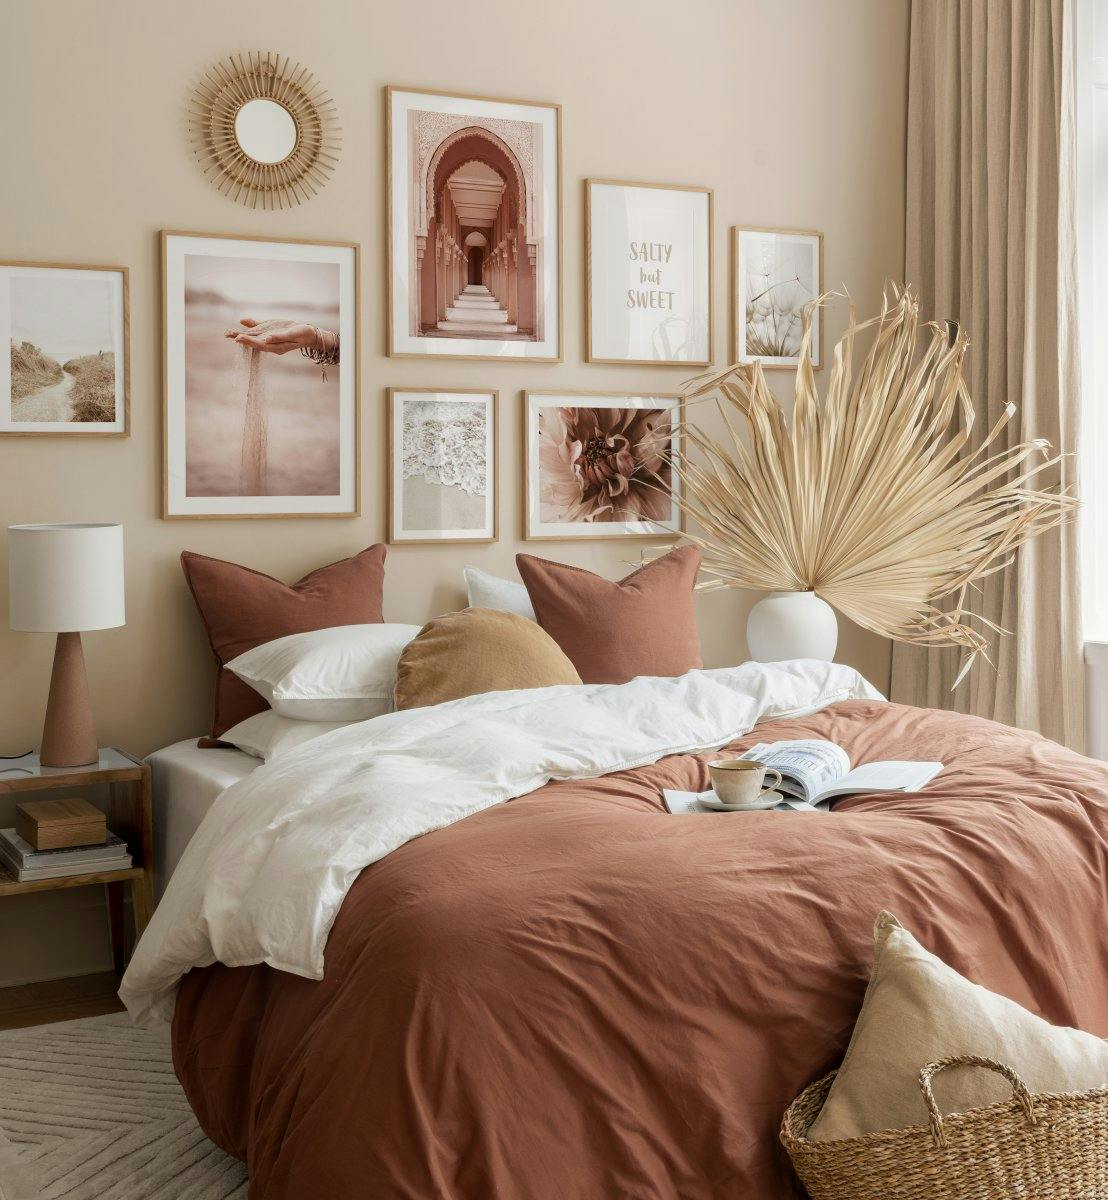 Red and beige posters and photographic art for bohemic bedroom